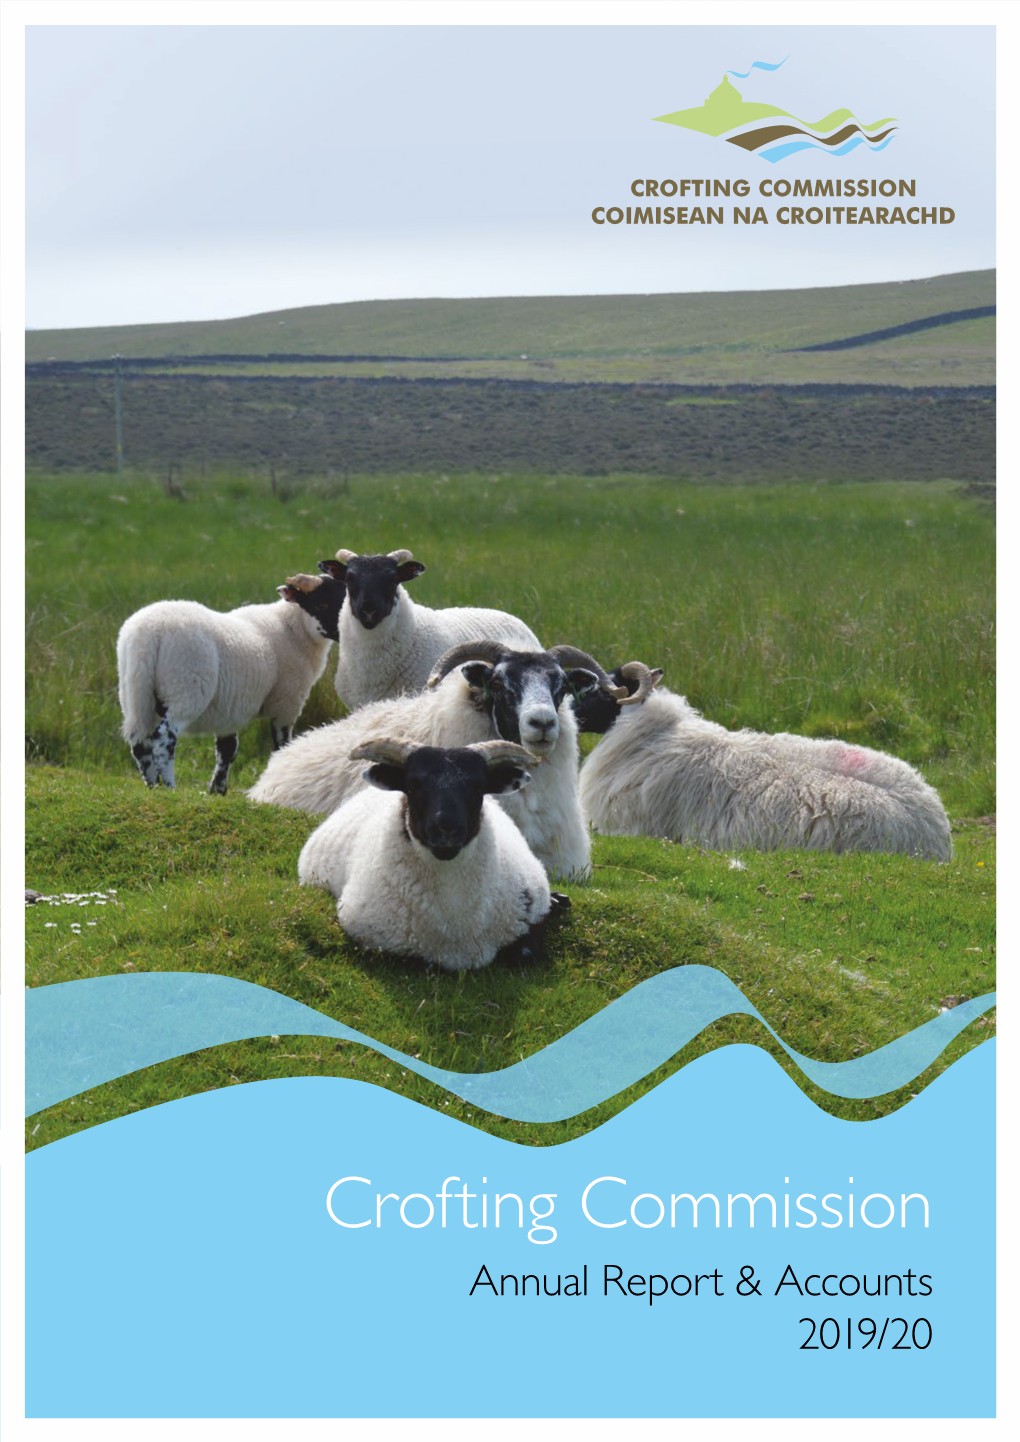 Read the Full Set of Our Crofting Stats for 2019/20